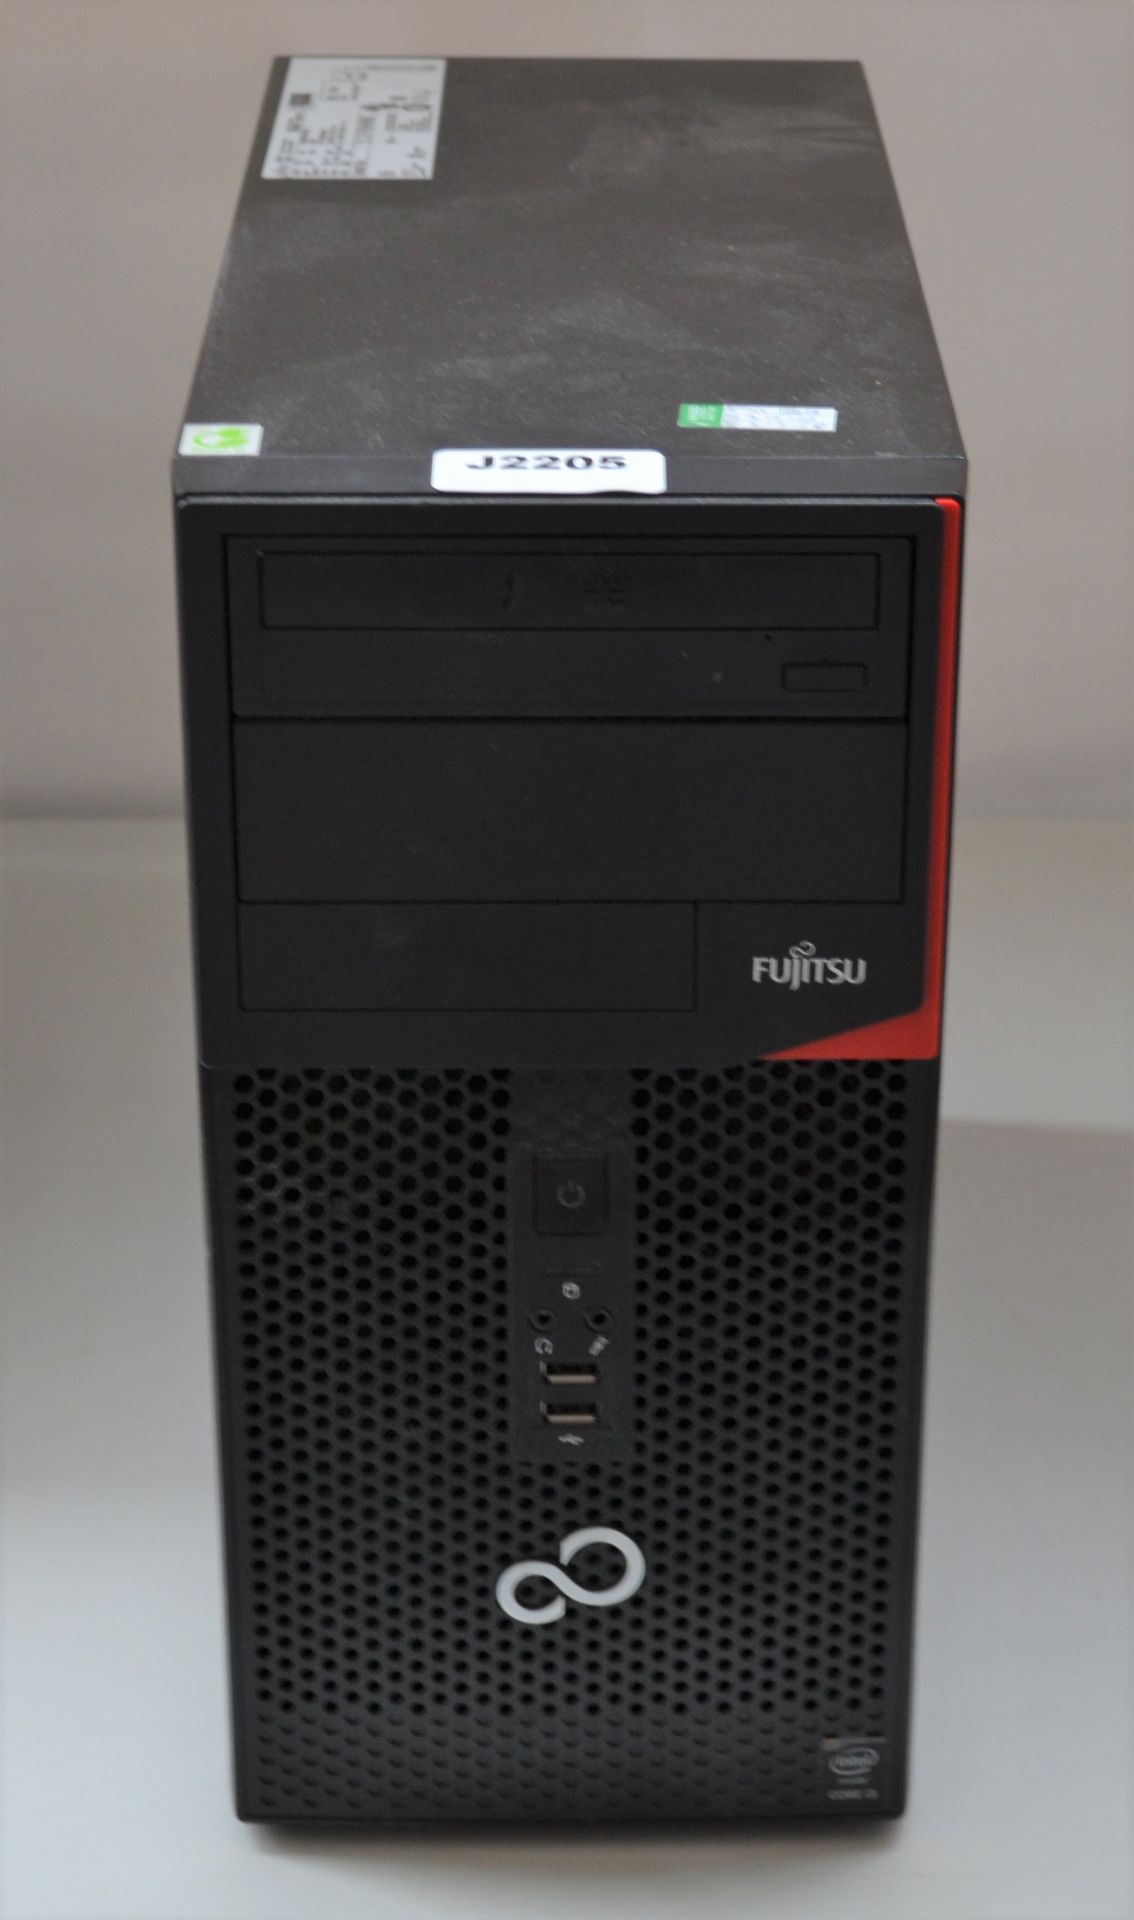 1 x Fujitsu Esprimo P420 Desktop PC With Hanns G 22 Inch Flat Screen Monitor - Features Intel i3- - Image 4 of 4